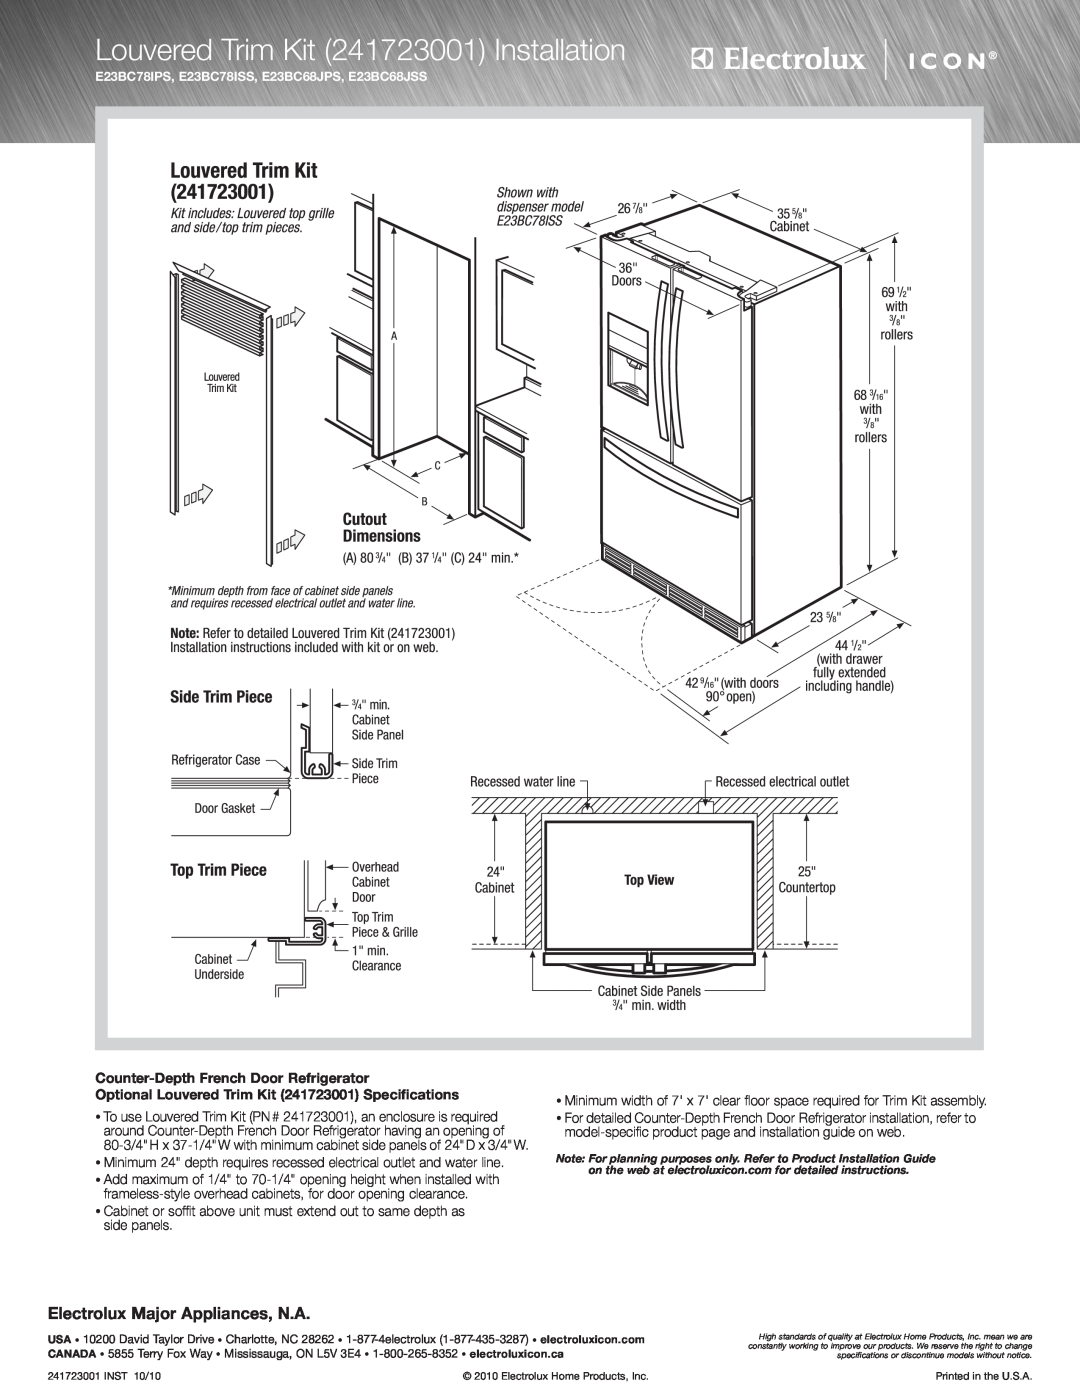 Electrolux E23BC68JPS specifications Louvered Trim Kit 241723001 Installation, Counter-Depth French Door Refrigerator 